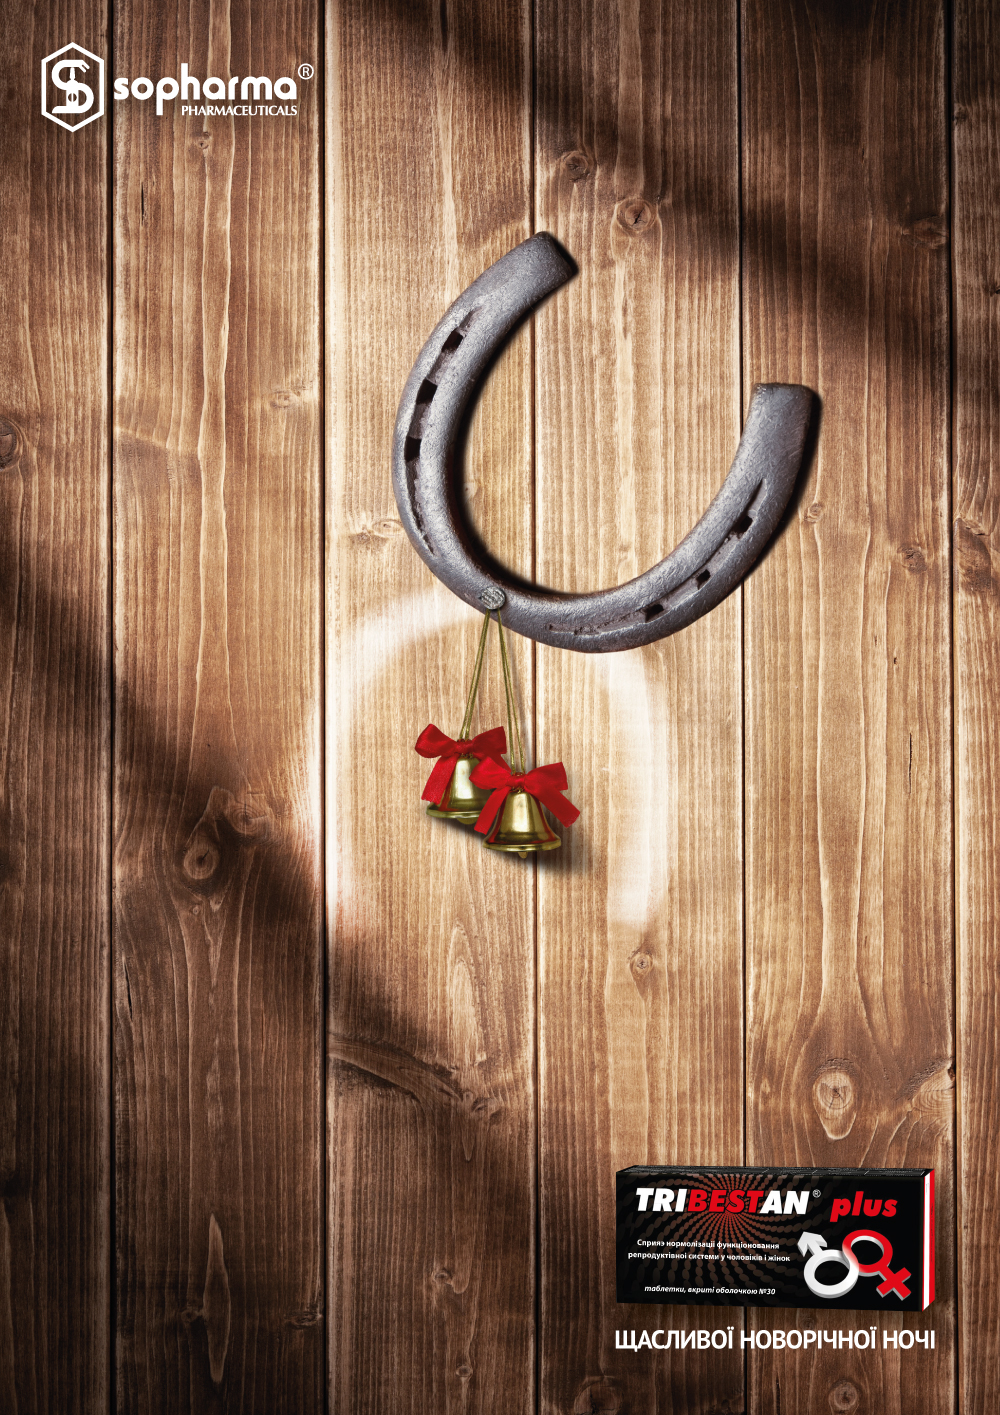 horseshoe poster sex new year bell red creative door trace Viagra Pharmaceutical medical happy lucky wood